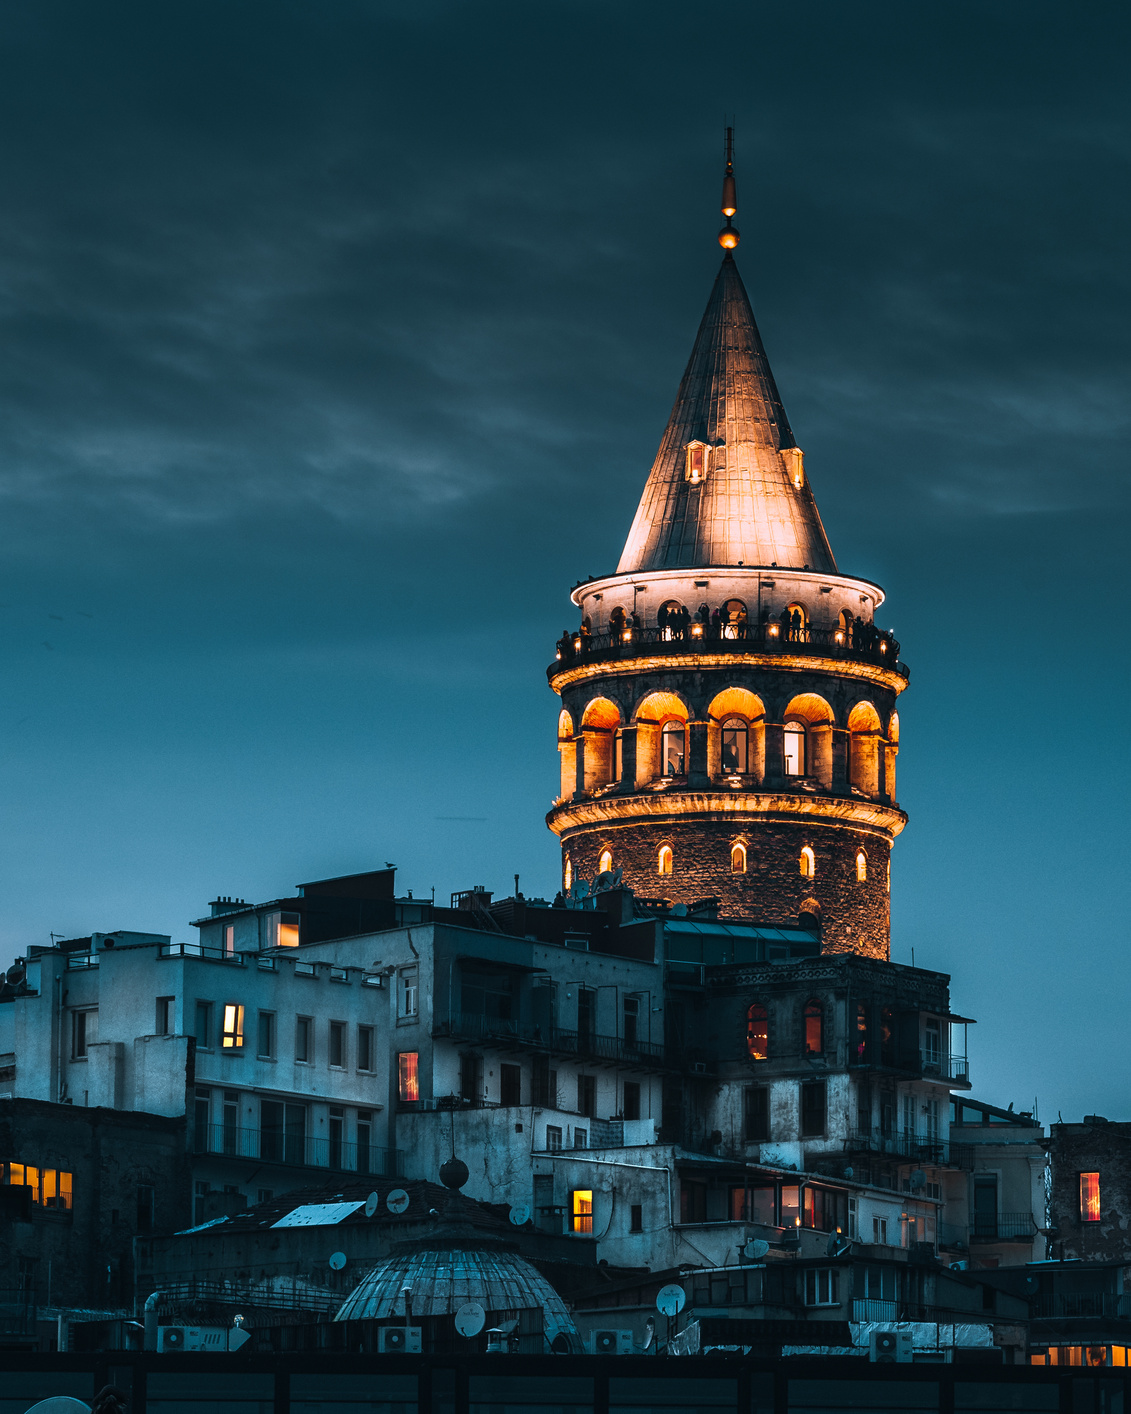 A View of the Galata Tower at Night 